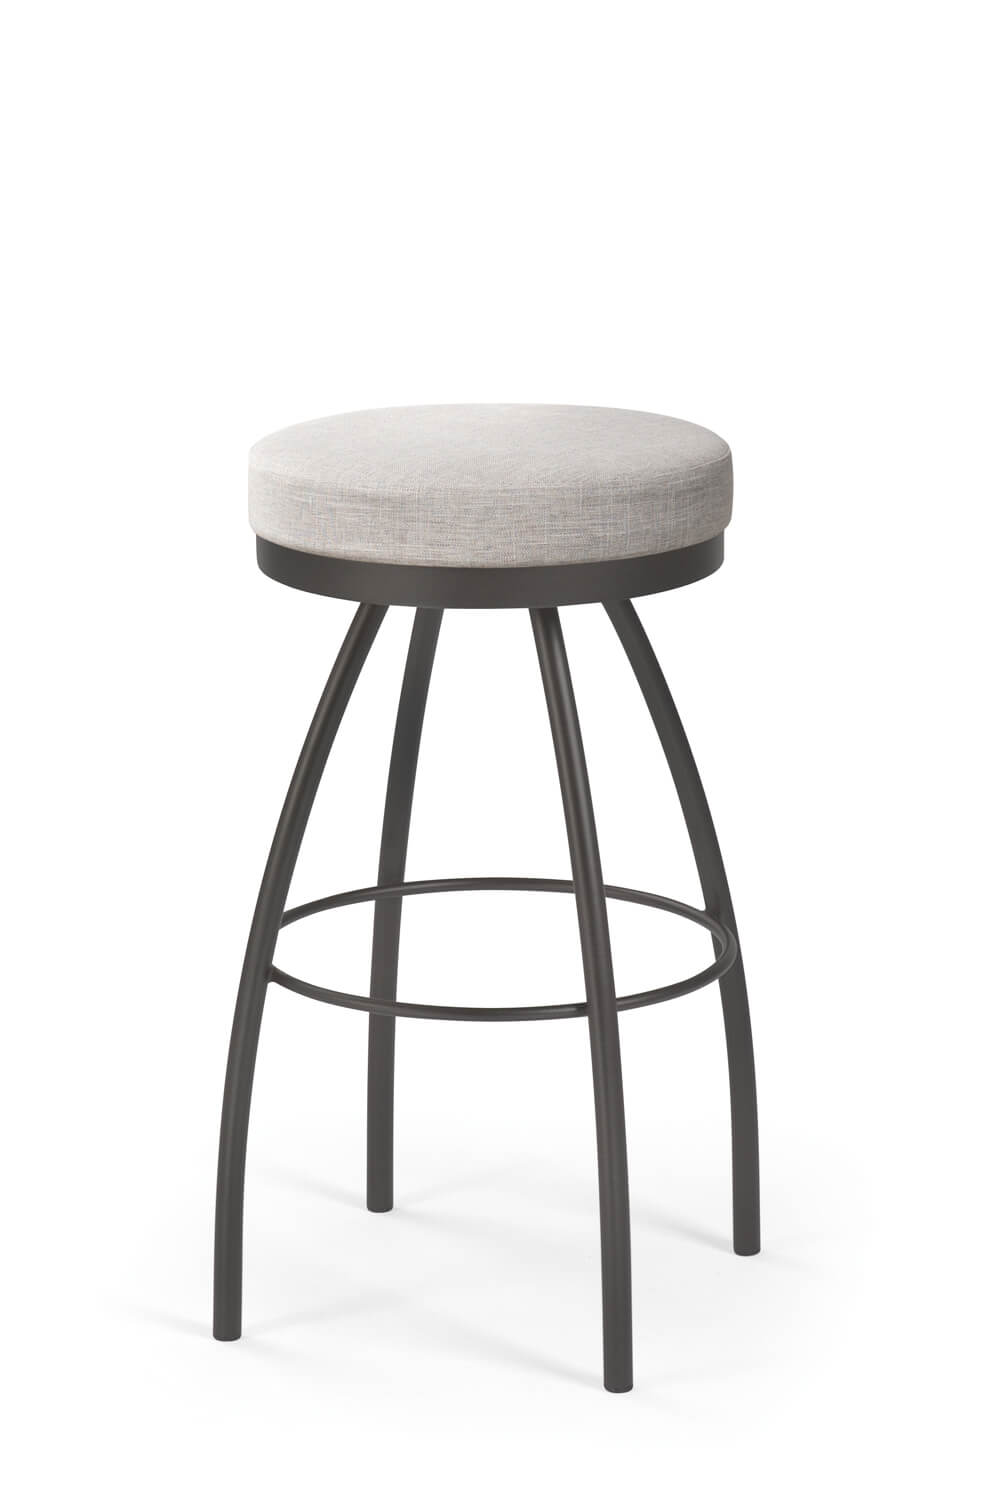 Trica Adam Backless Swivel Stool For, Backless Fabric Bar Stools